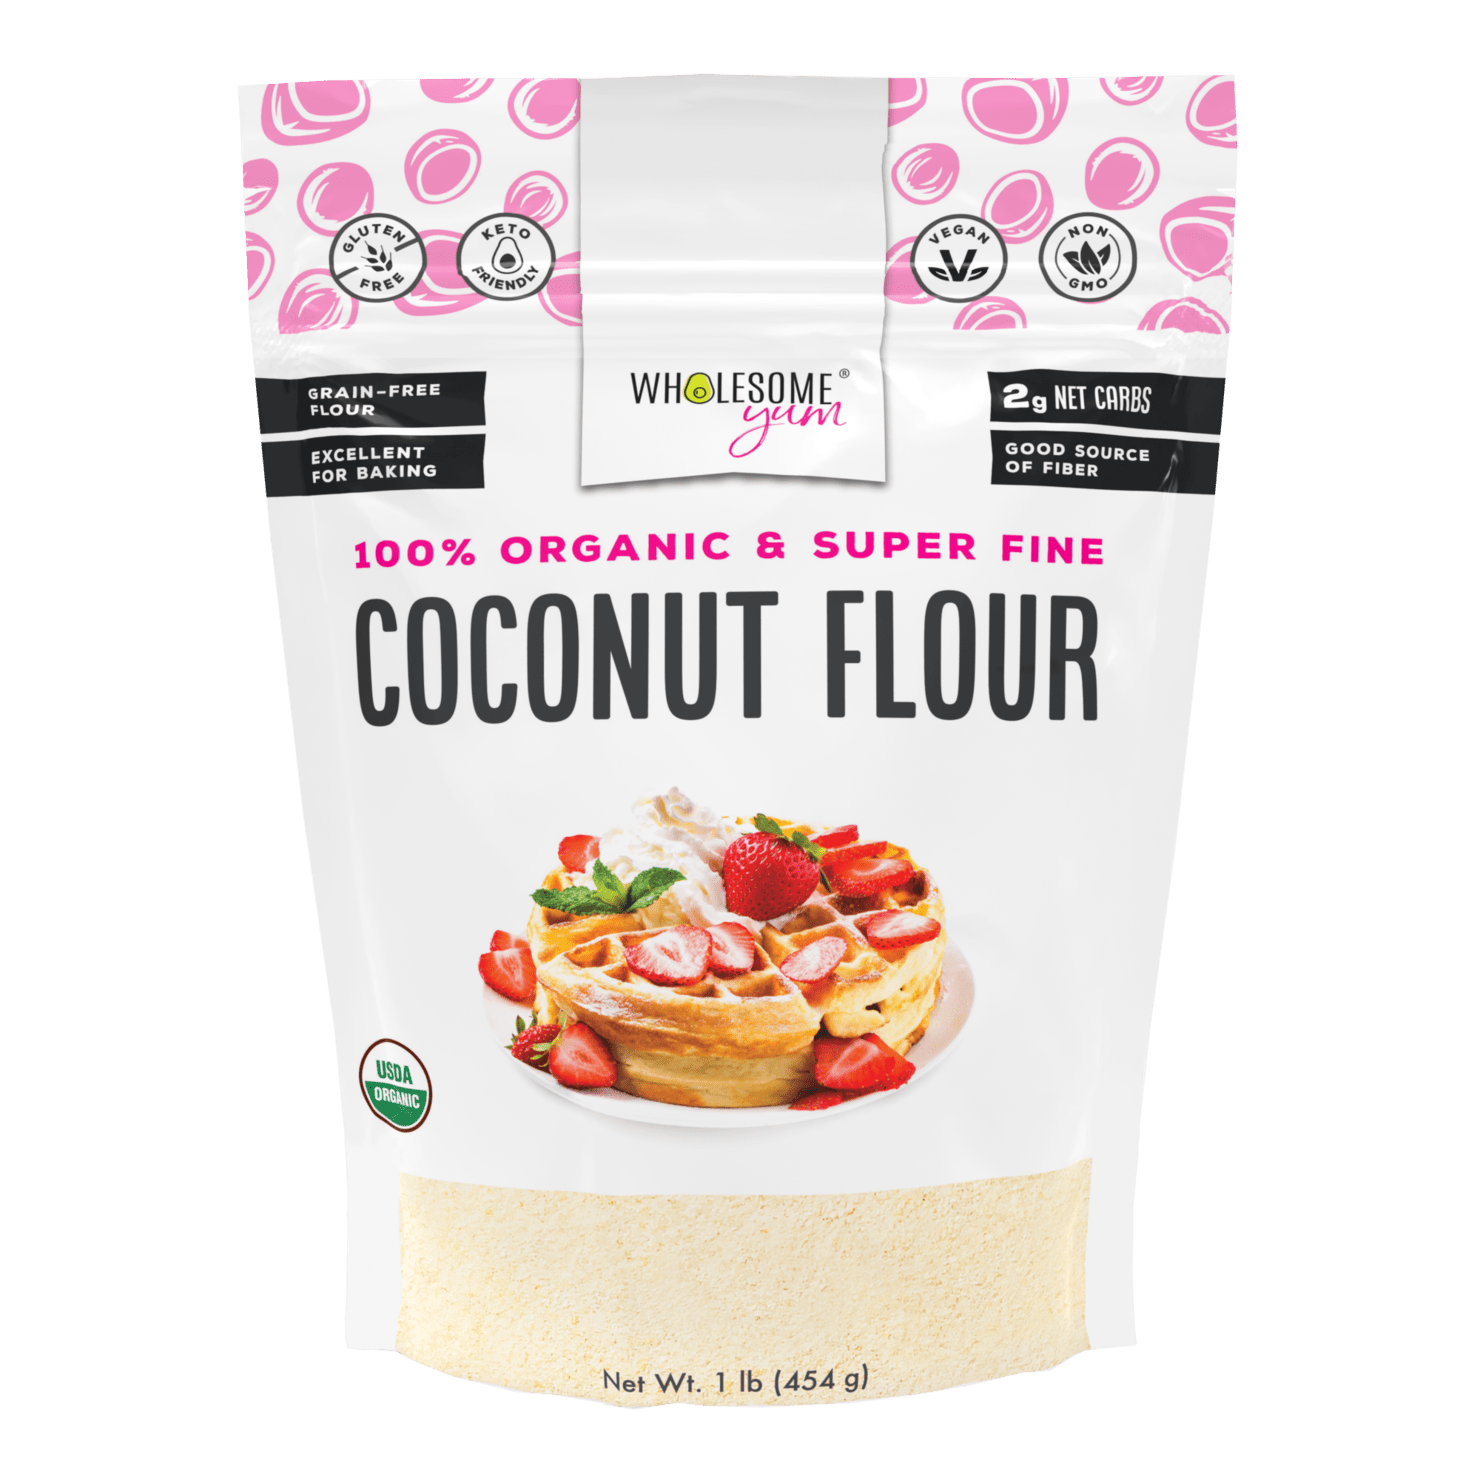 Bag of Wholesome Yum Coconut Flour.